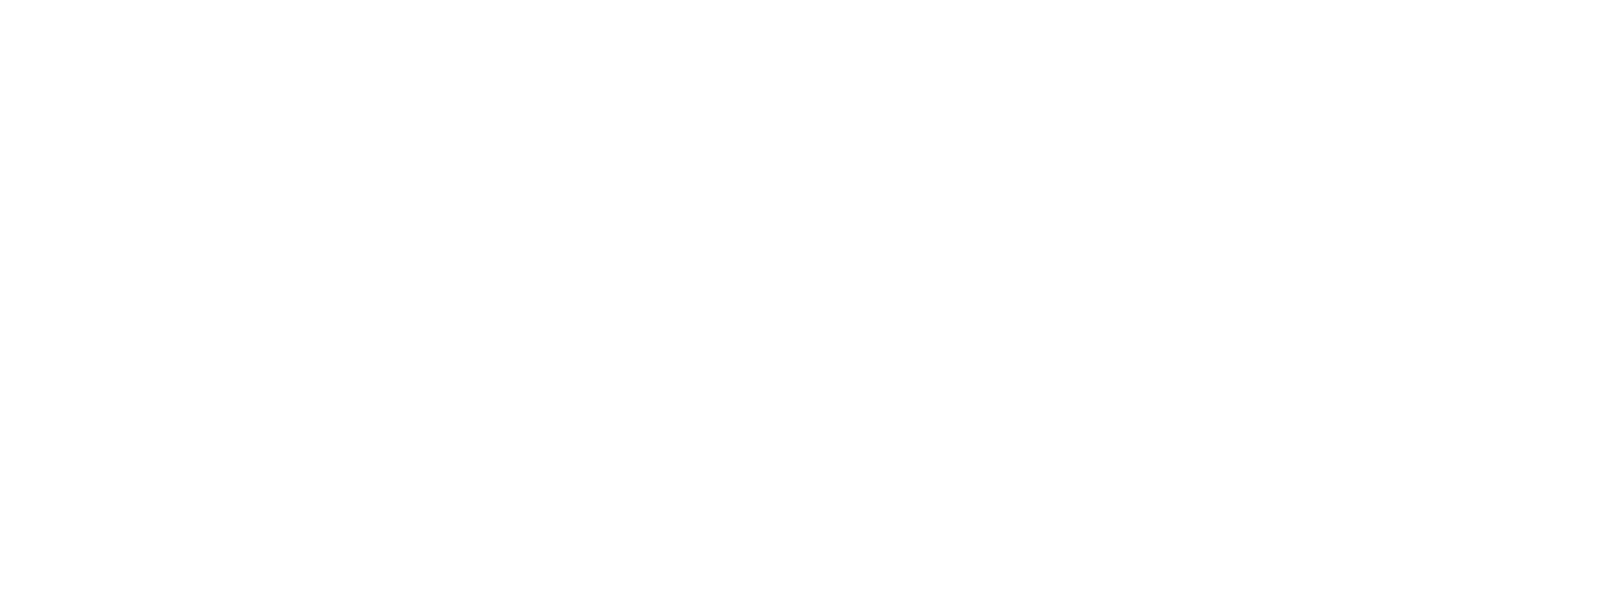 FamConnected_digital_white.png